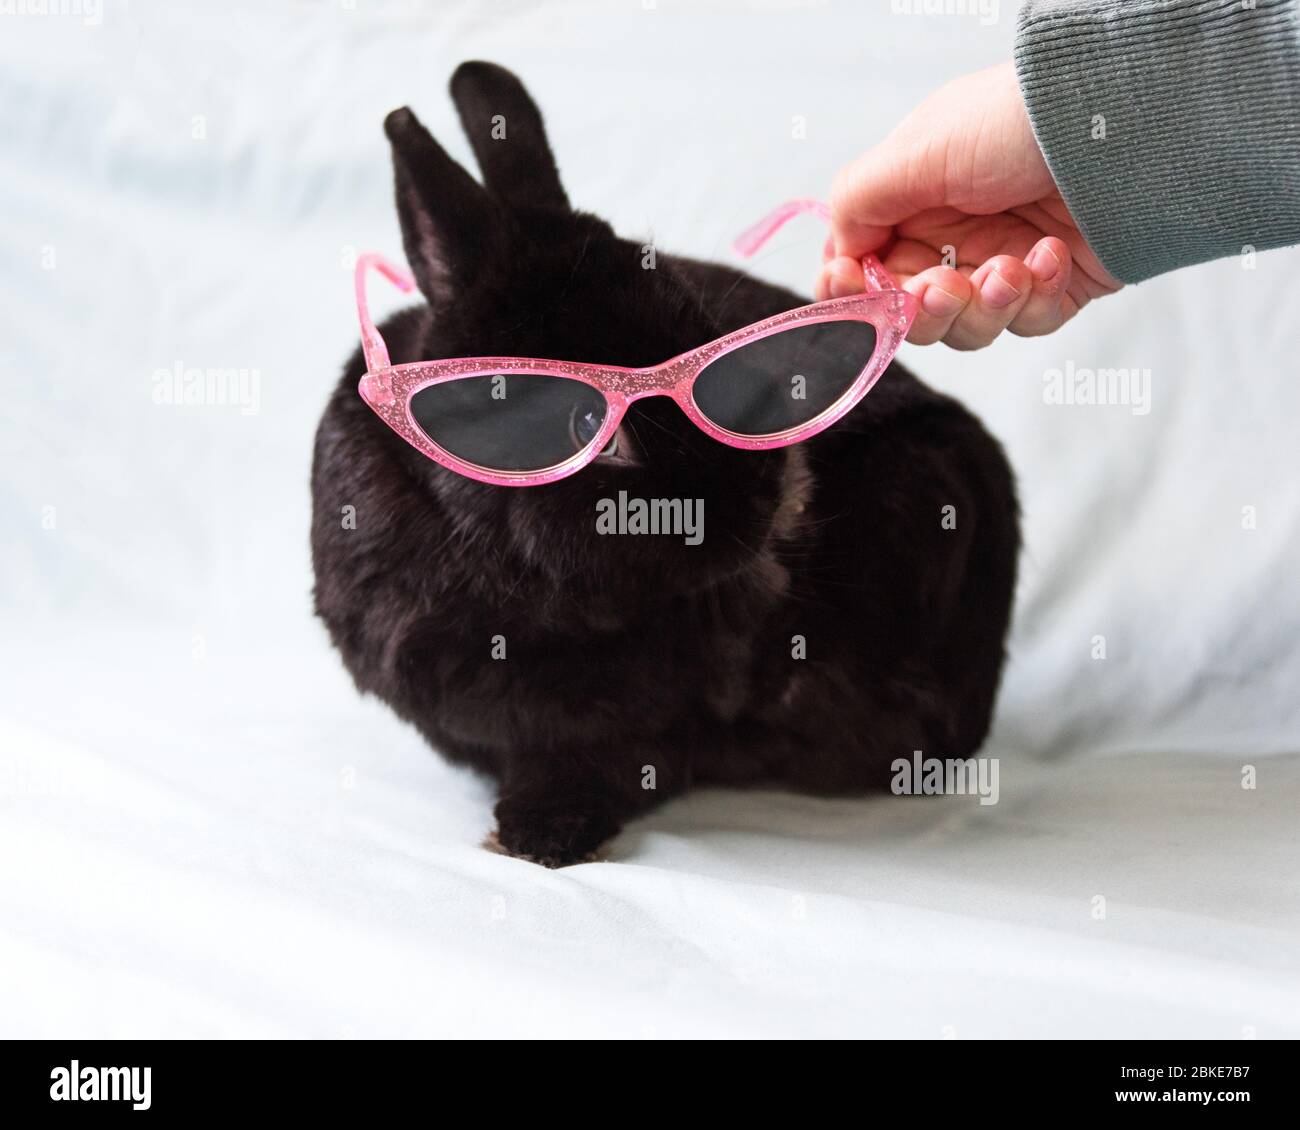 Woman's hand holding sparkly pink cat-eye glasses in front of a black Netherland Dwarf rabbit. Stock Photo